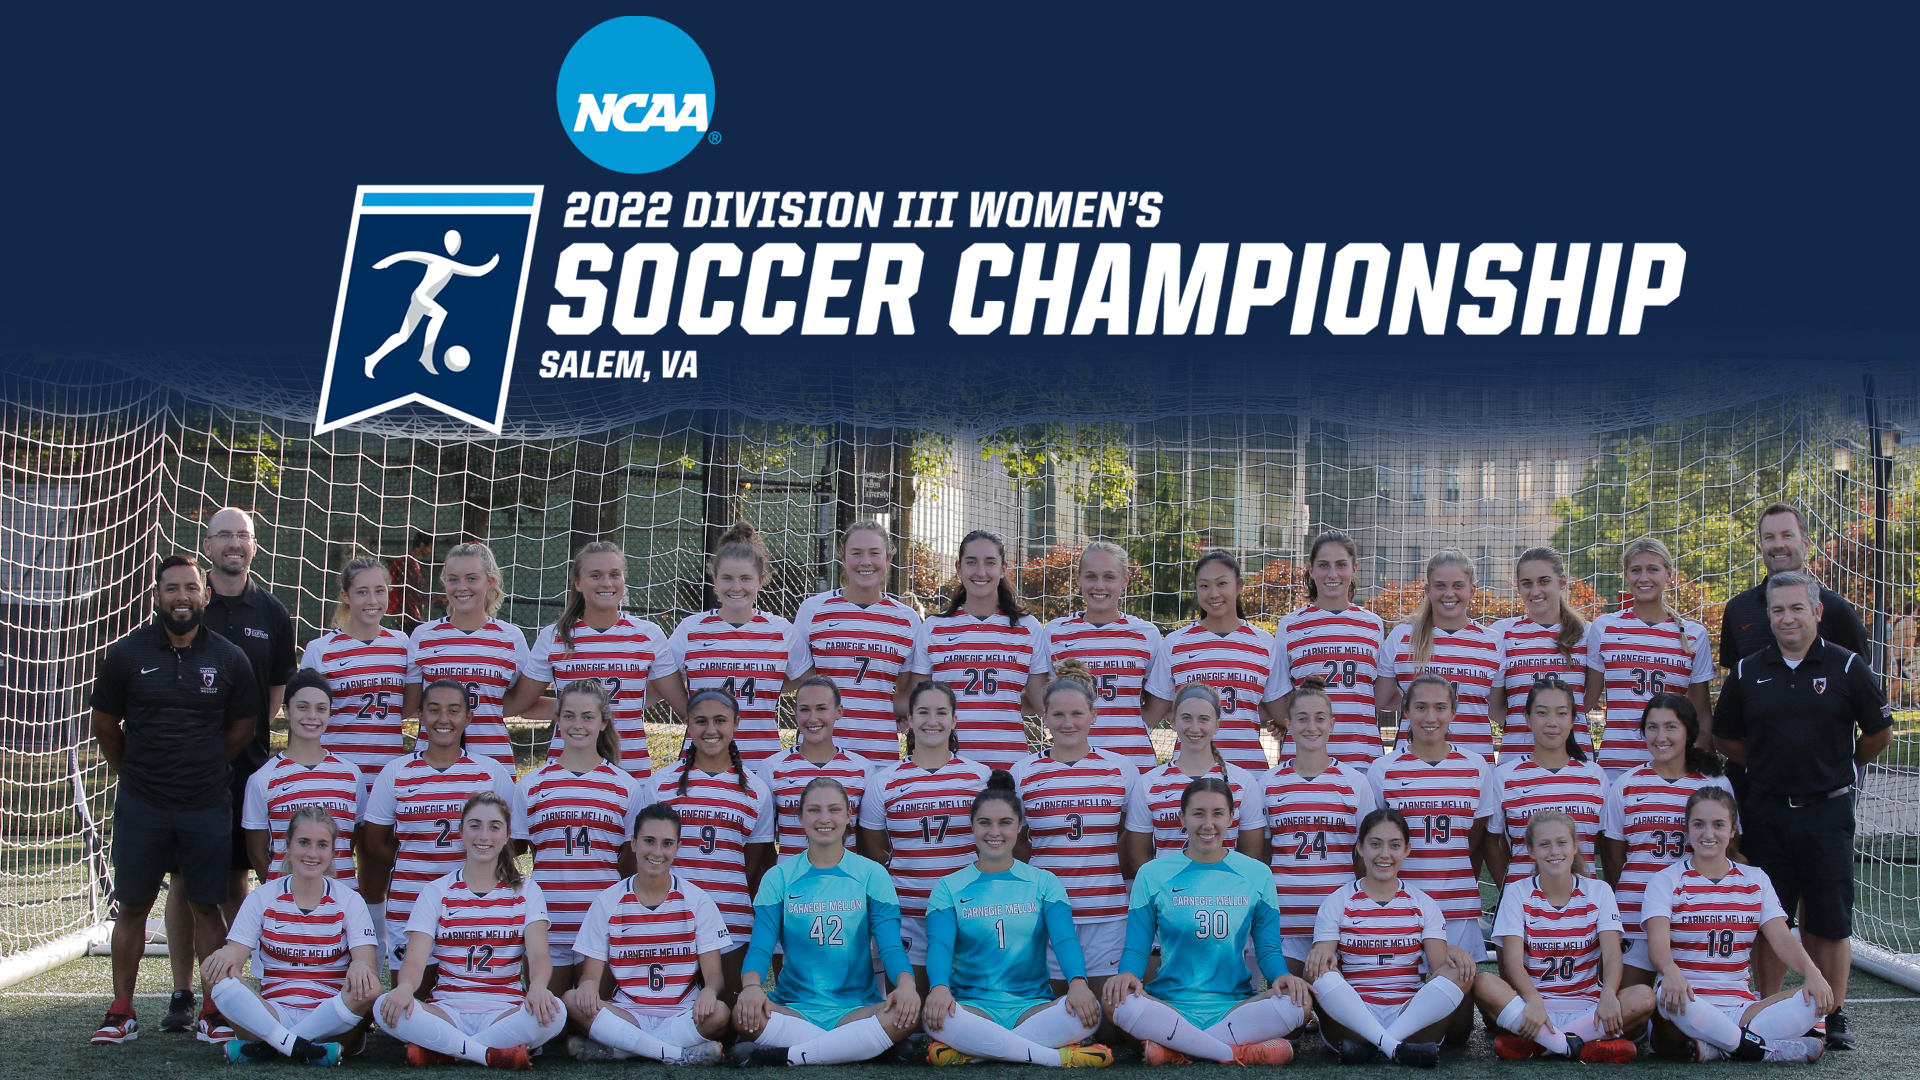 women's soccer team photo with players in three rows and text reading 2022 Division III Women's Soccer Championship